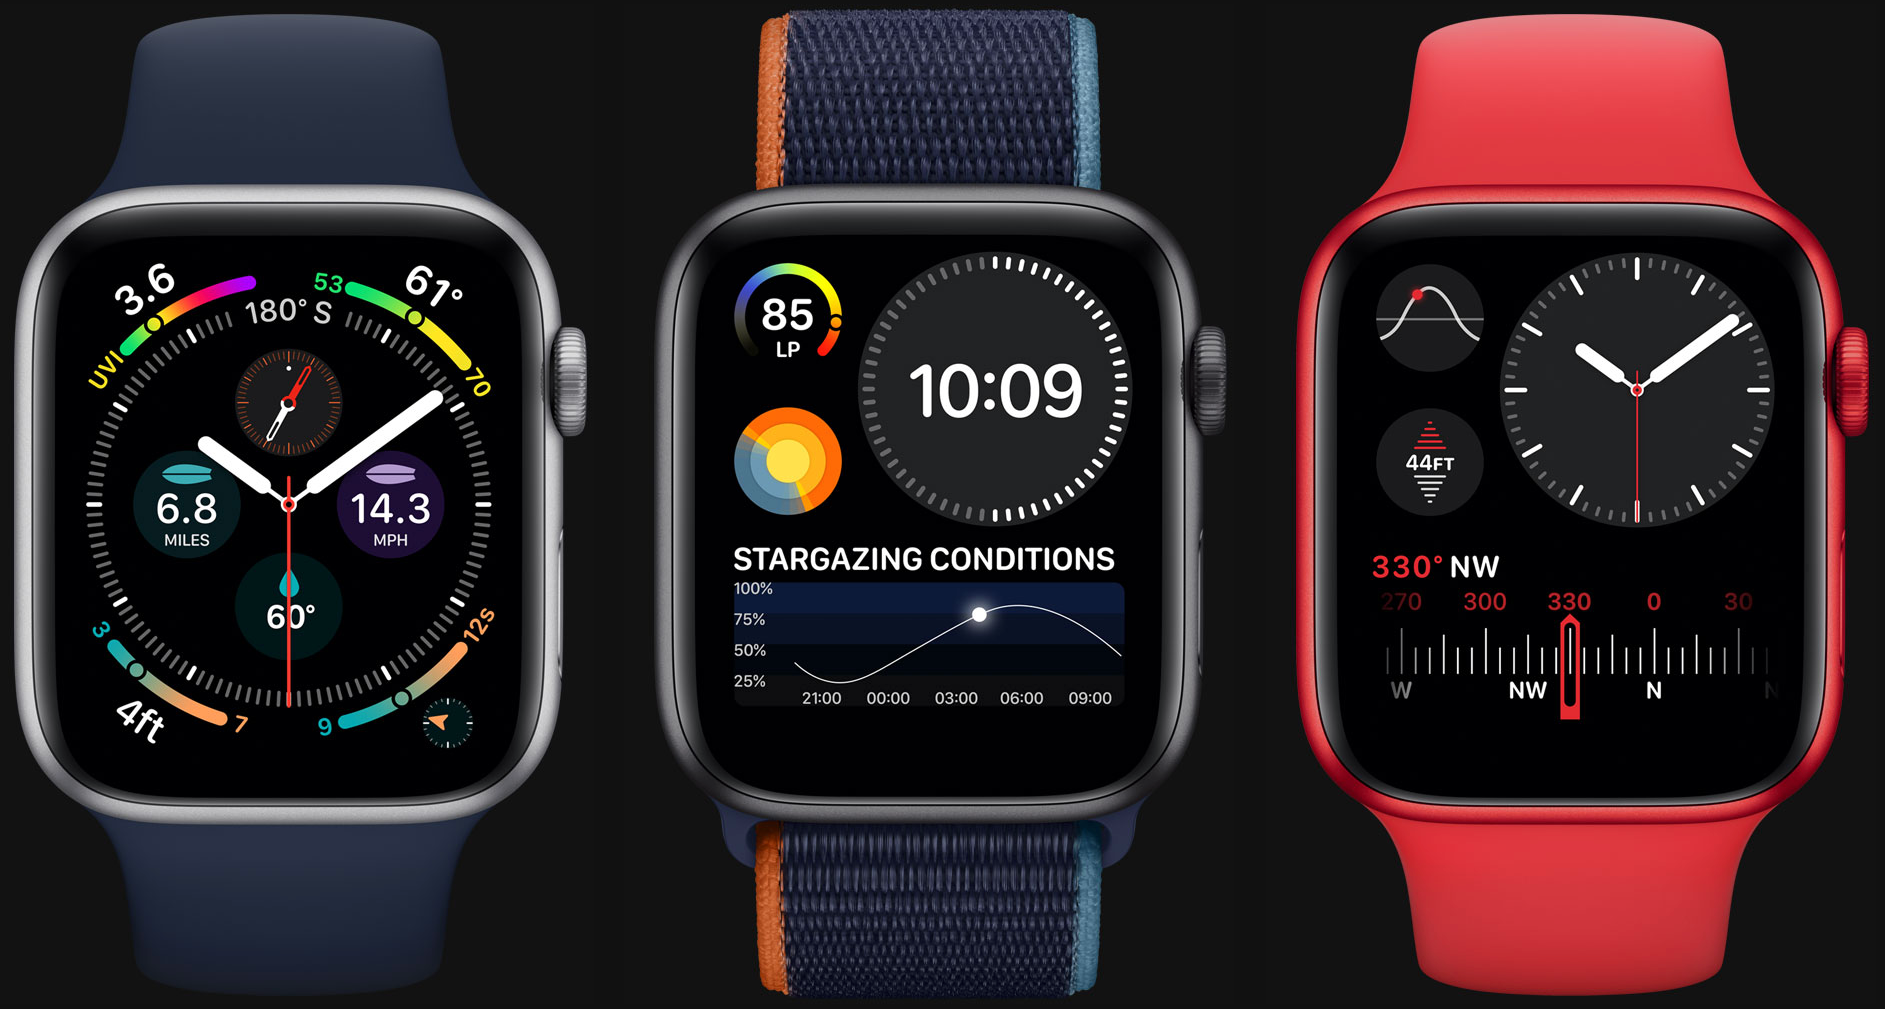 Here is Why The Apple Watch Always Shows 10:09 | by Walid AO | Medium